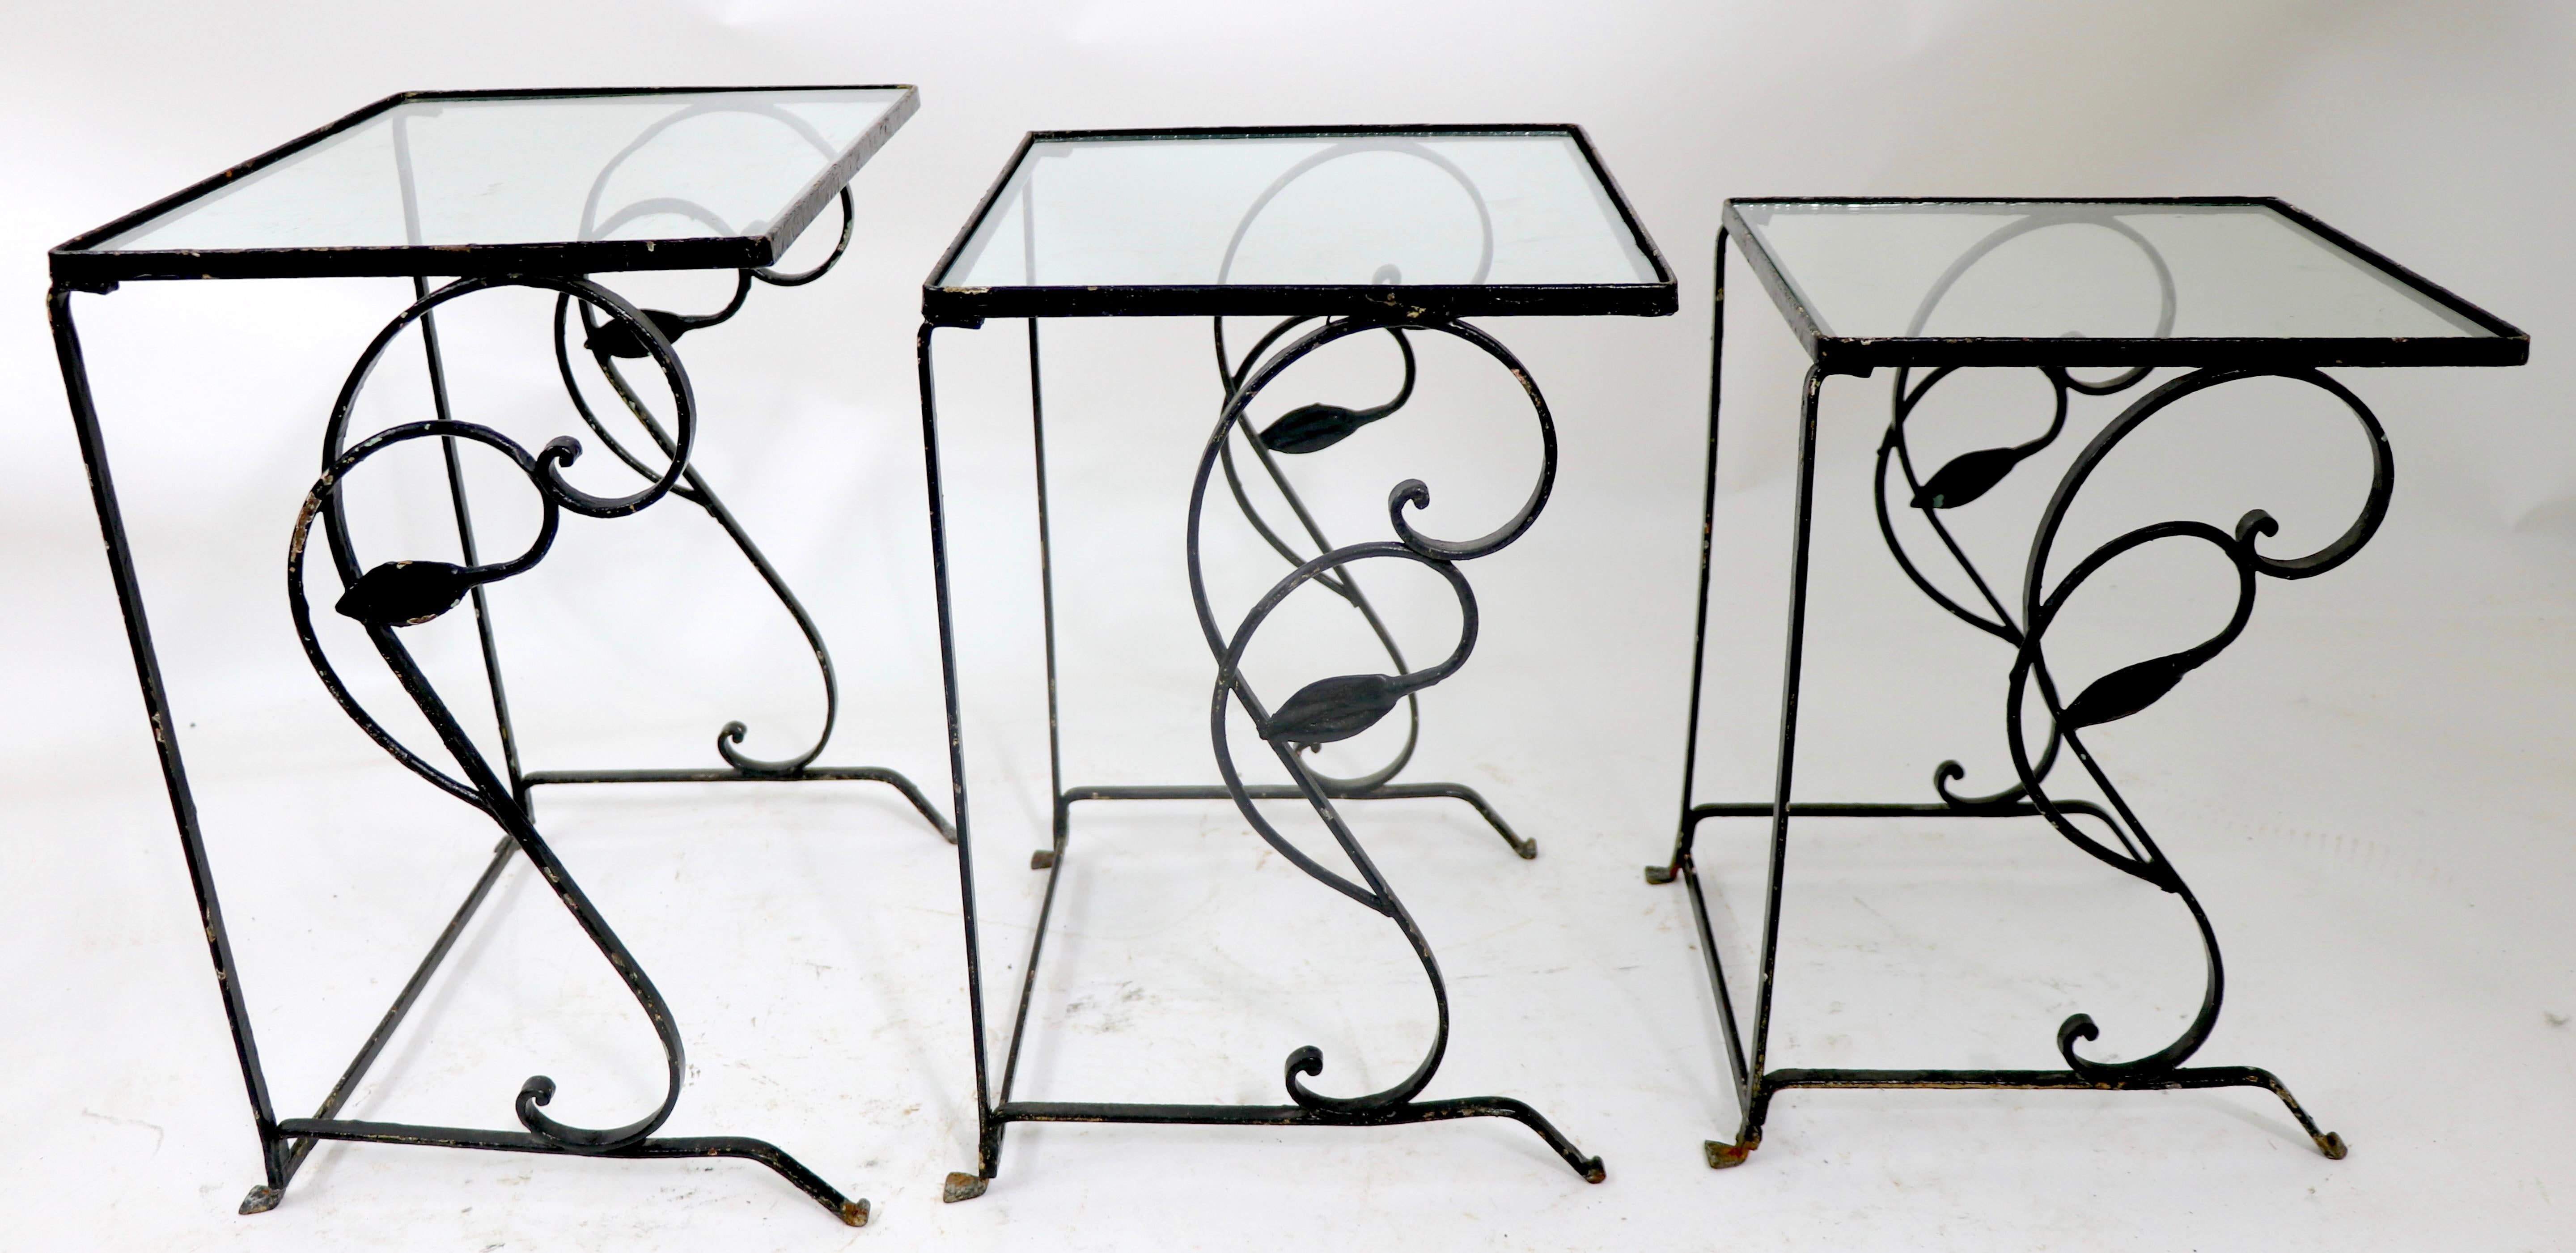 Chic three piece set of graduated nesting tables having decorative wrought iron frames and glass insert tops. The tables are structurally sound and sturdy, free of damage, or repairs. The tables are currently in later, but not new , black paint